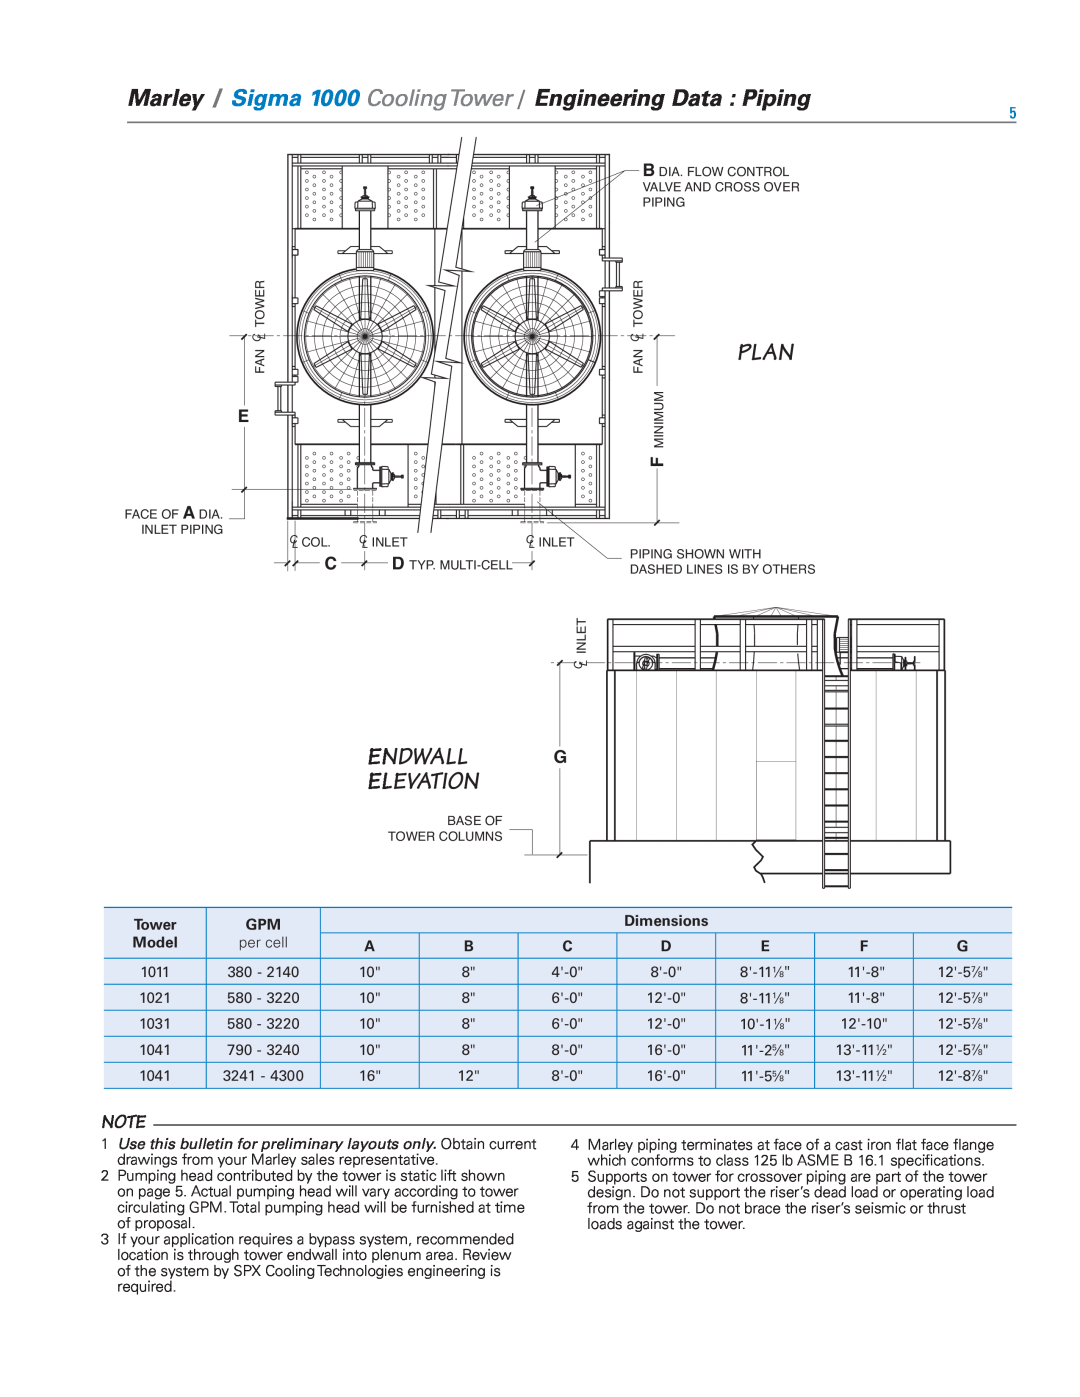 SPX Cooling Technologies 1000, 1200 specifications Plan, Endwall, Elevation, Tower, Dimensions, Model 